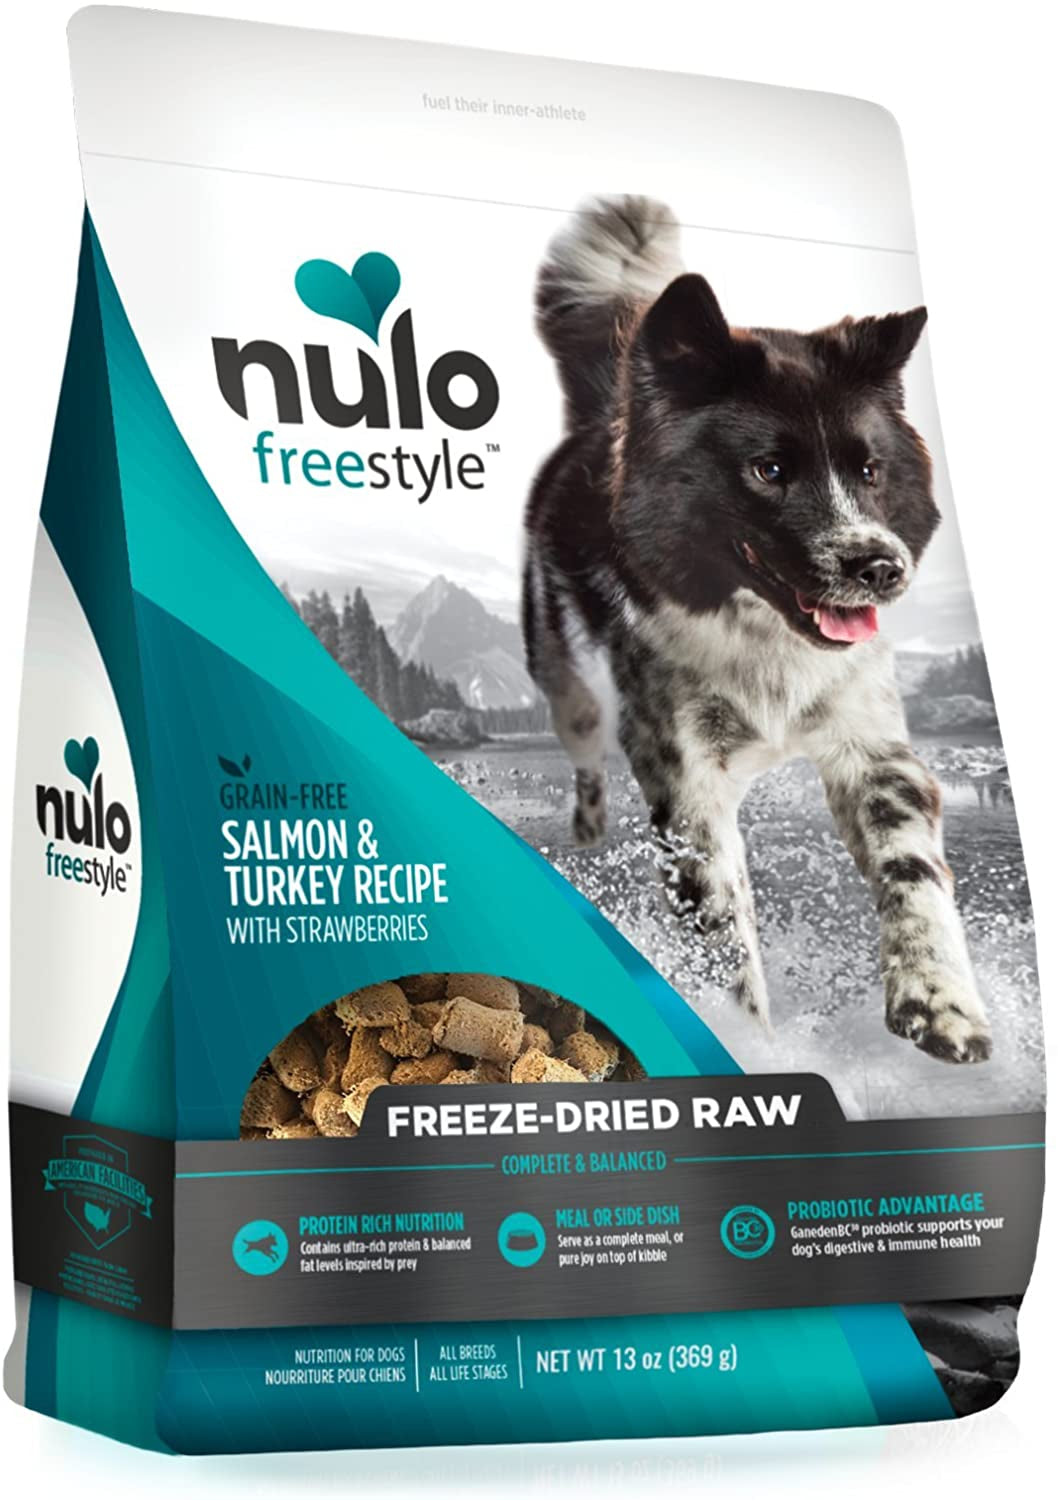 Nulo Freeze Dried Raw Dog Food for All Ages & Breeds: Natural Grain Free Formula with Ganedenbc30 Probiotics for Digestive & Immune Health - Salmon & Turkey with Strawberries - 13 Oz Bag